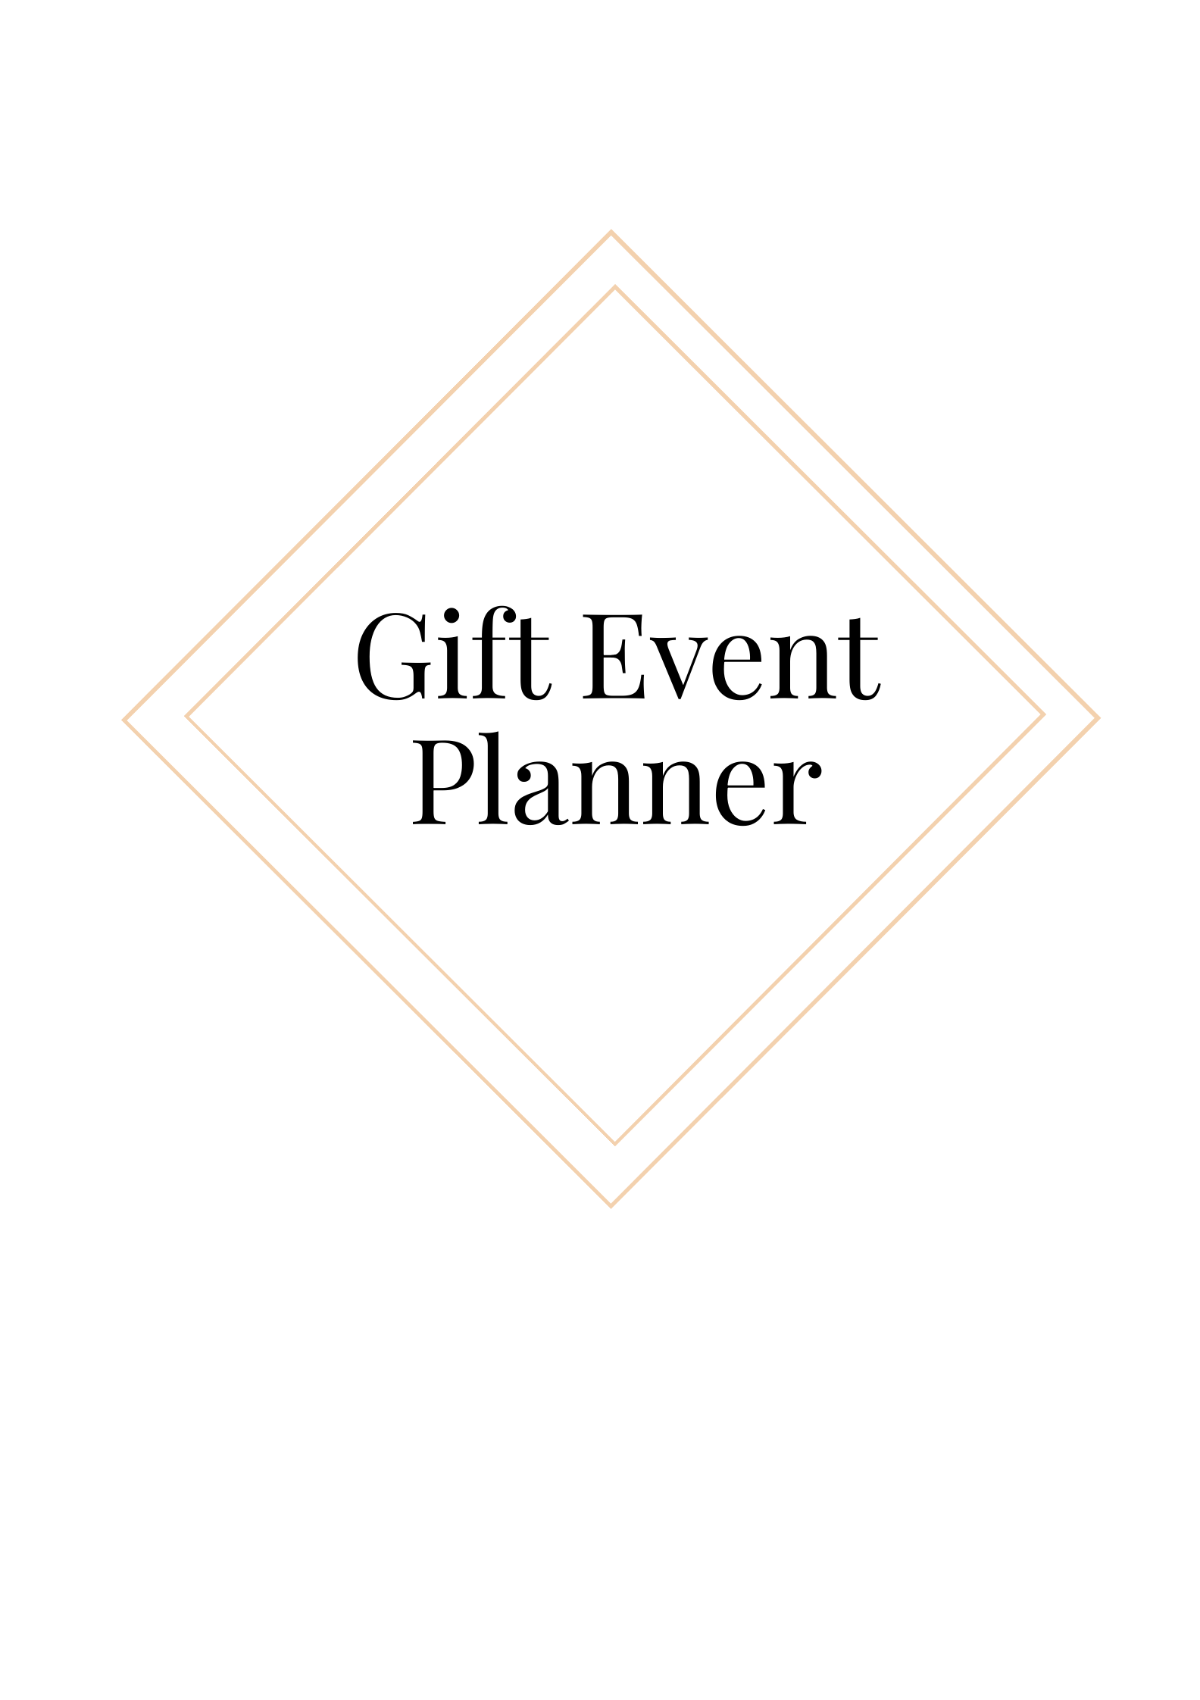 Gift Event Planner Template